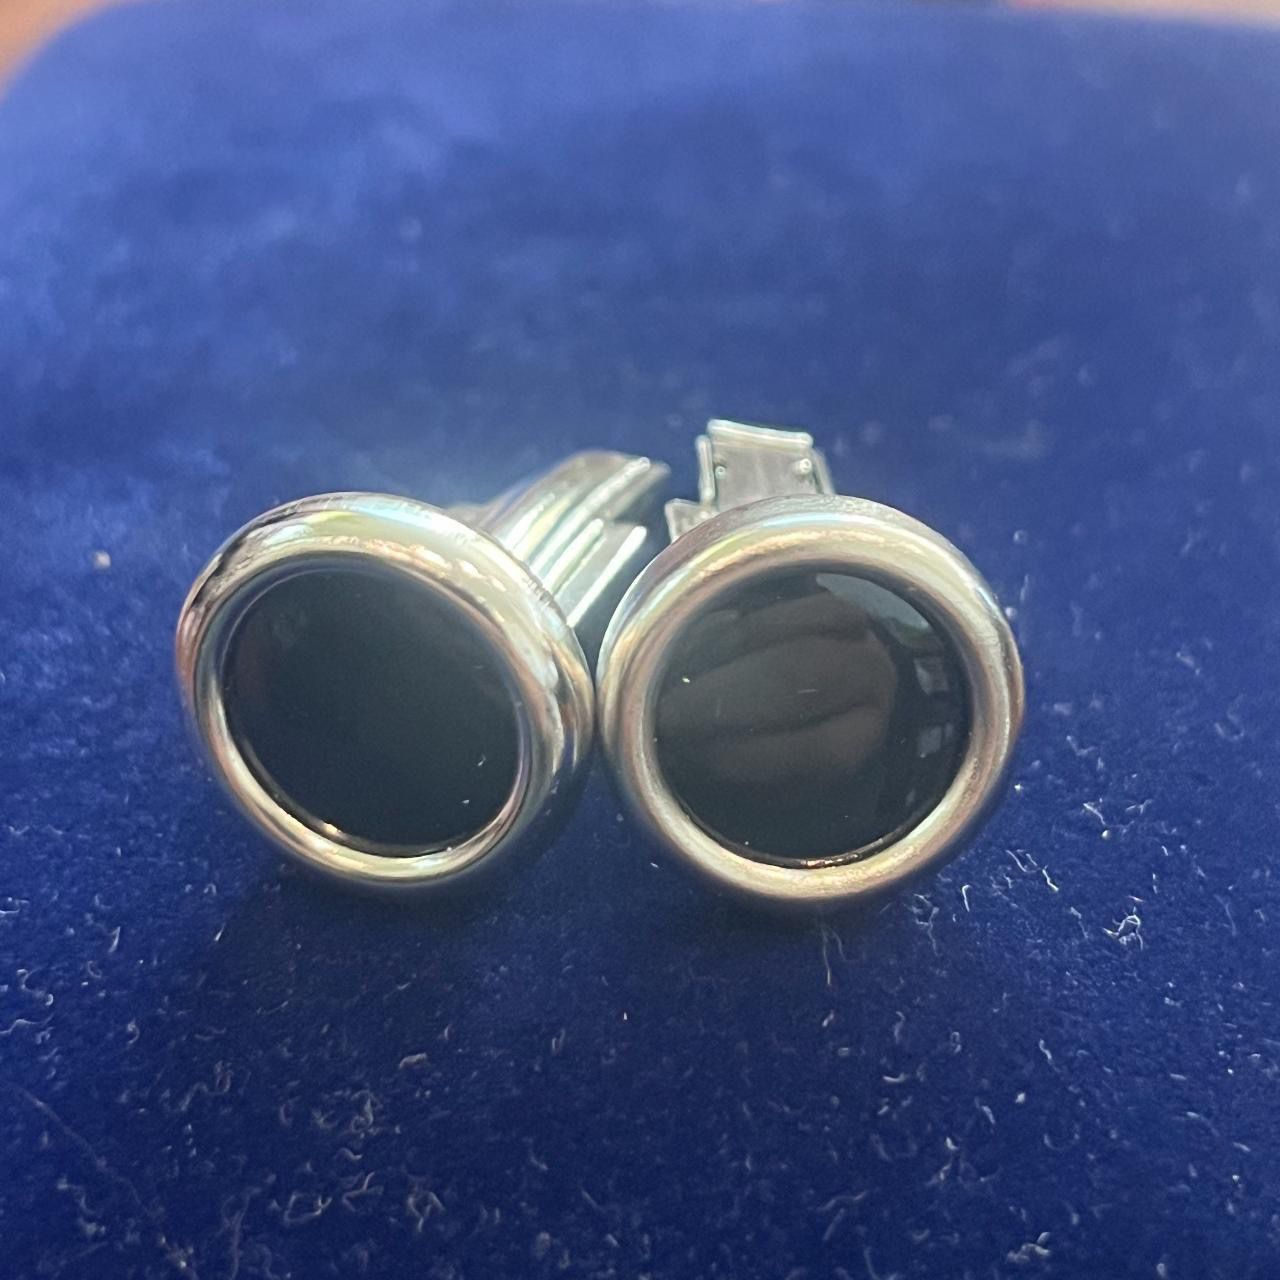 Vintage Cabuchon Cuff Links Black & Sterling Silver Pair of cuff links Fathers Day, Accessory